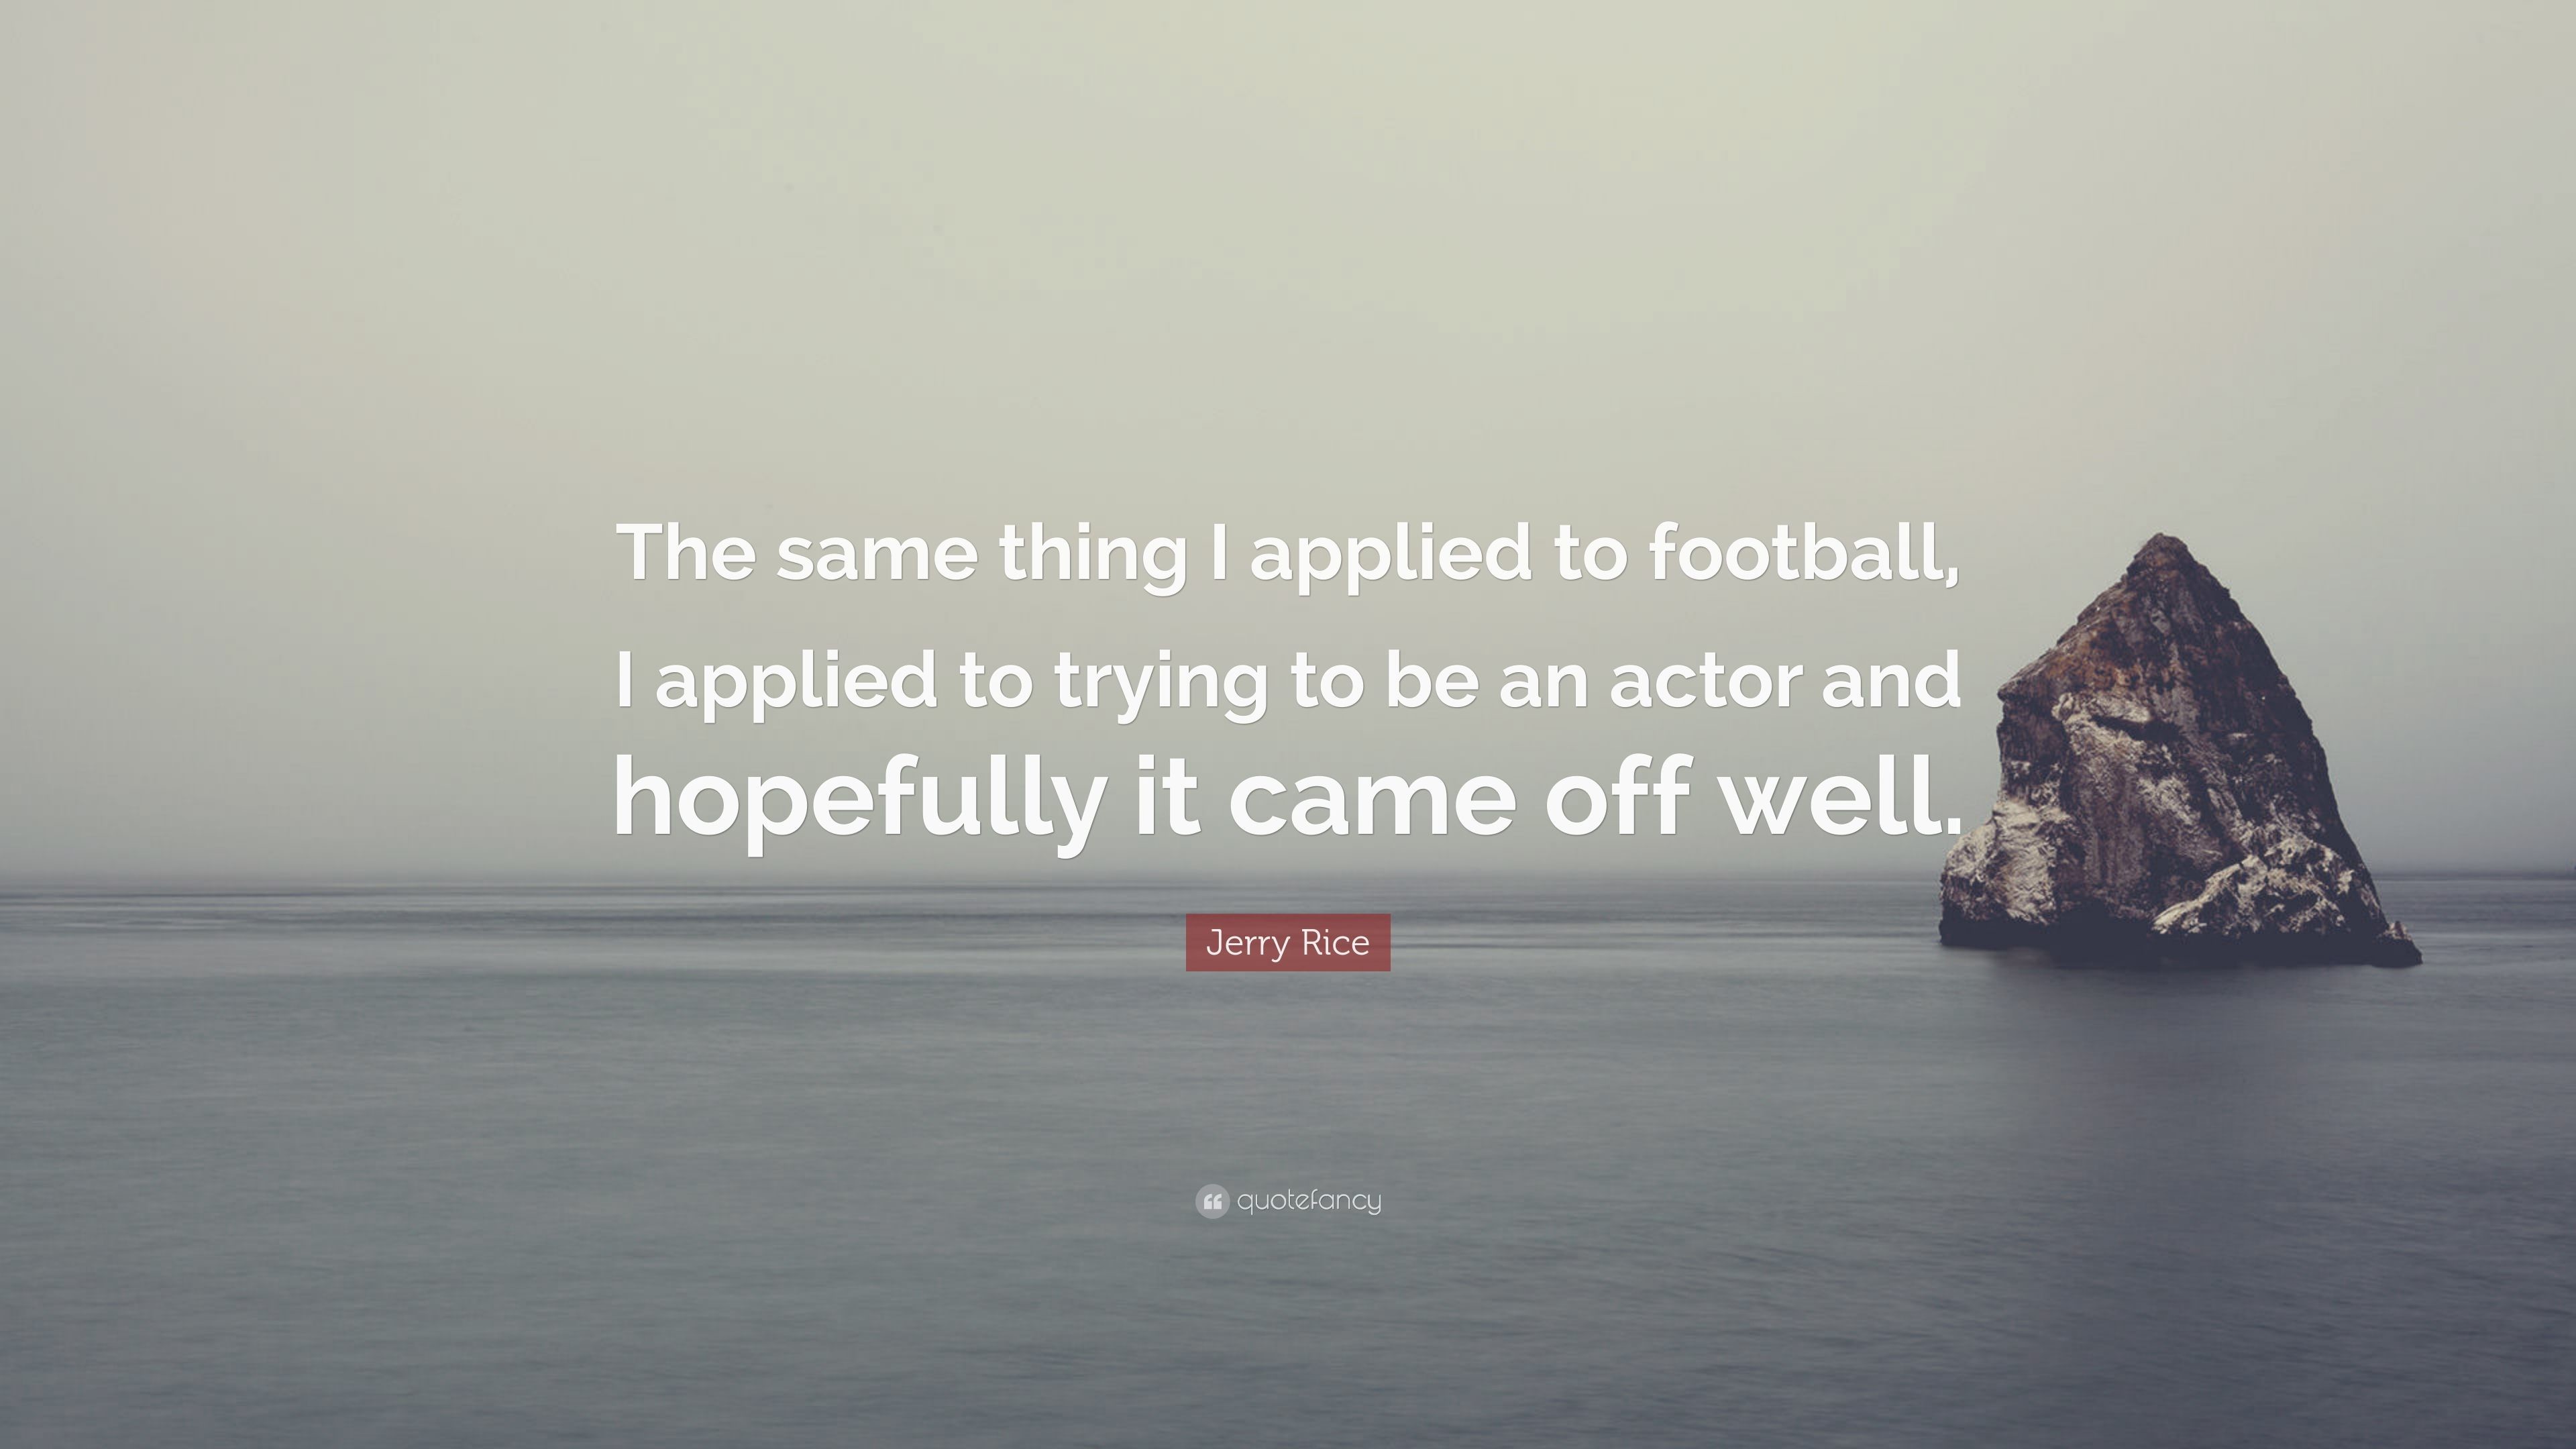 Jerry Rice Quote The same thing I applied to football, I applied to